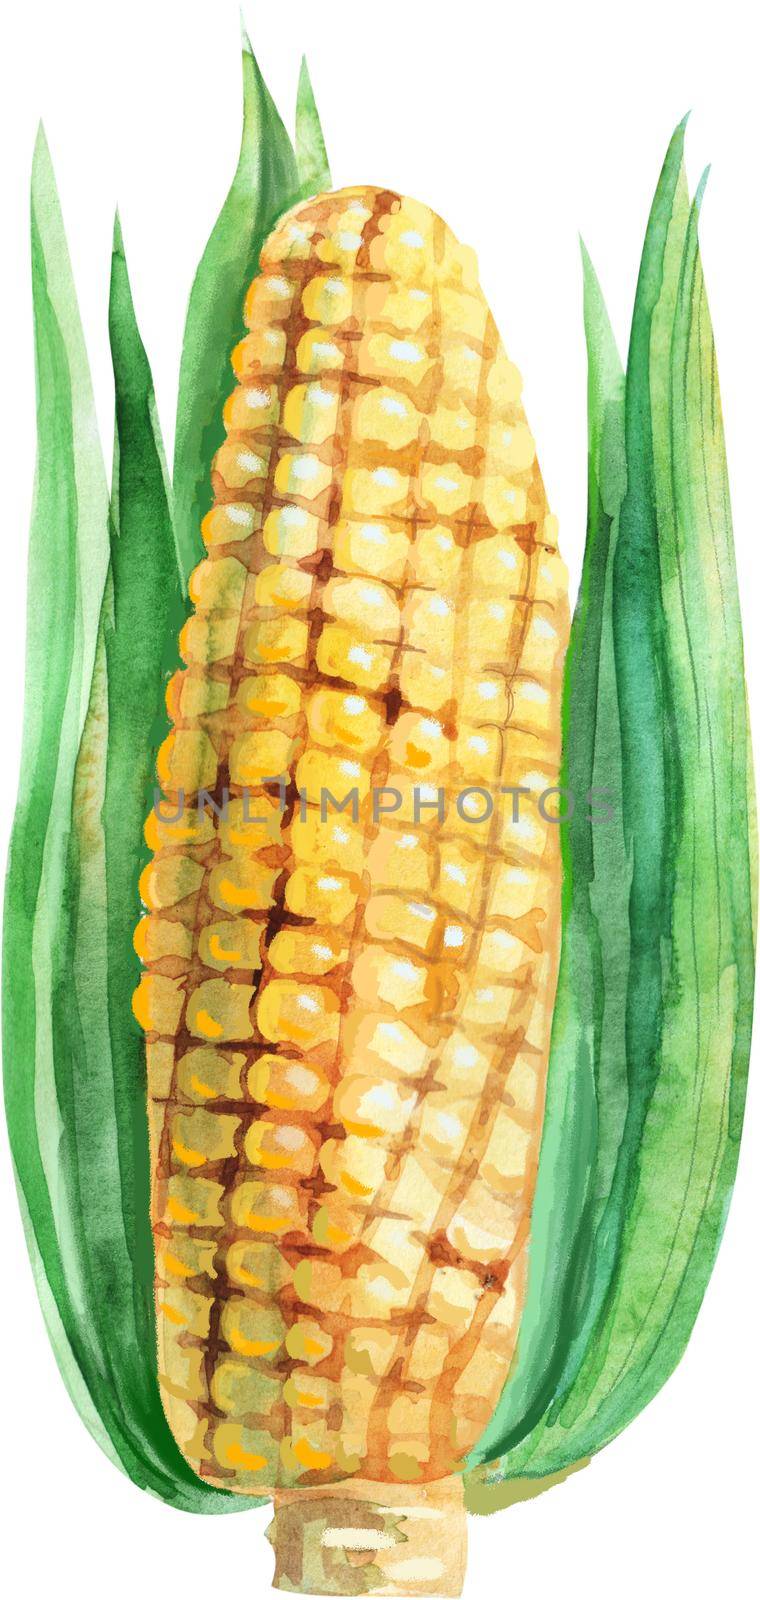 An ear of yellow corn, watercolor illustration by NataOmsk